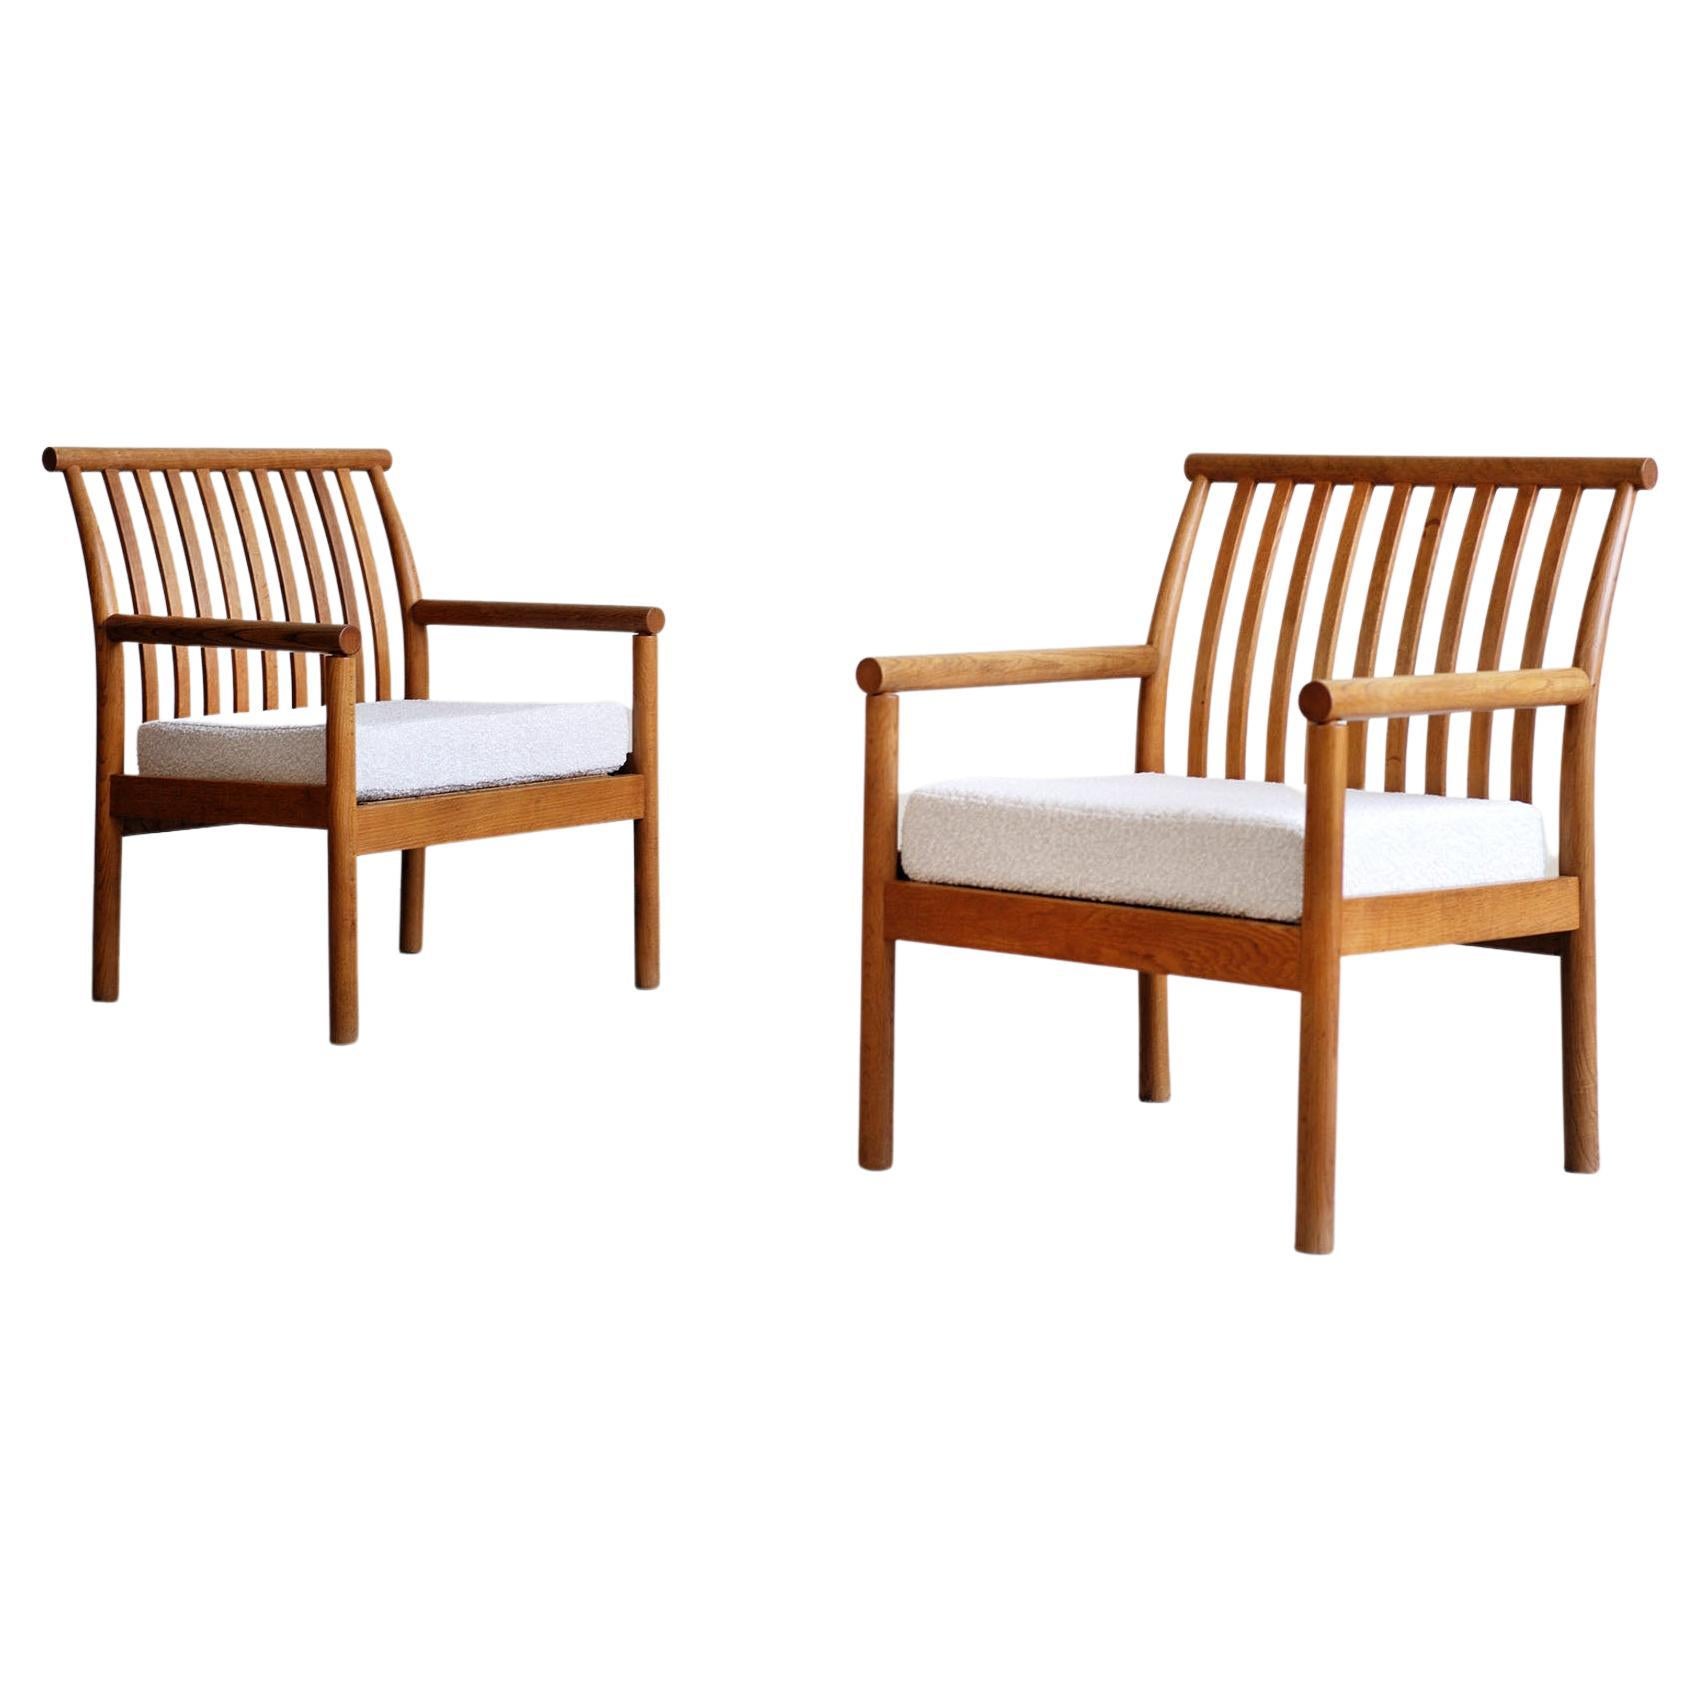 Isamu Kenmochi, Pair of Curved Oak Armchairs, Japan, 1960 For Sale